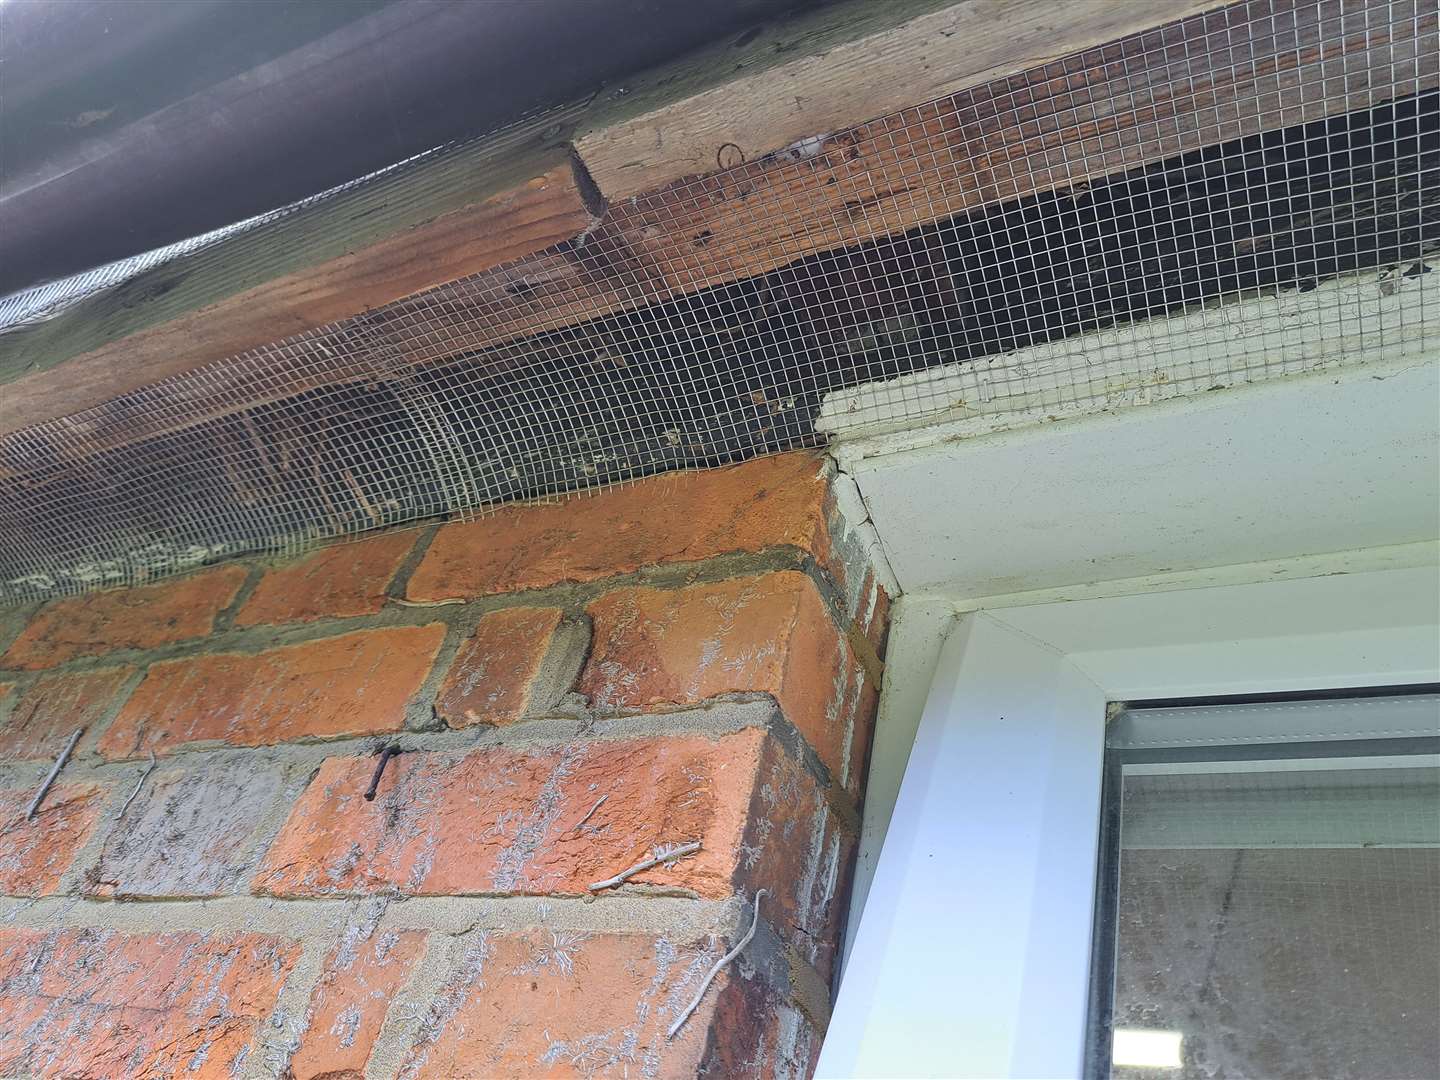 Anti-rodent mesh has been installed